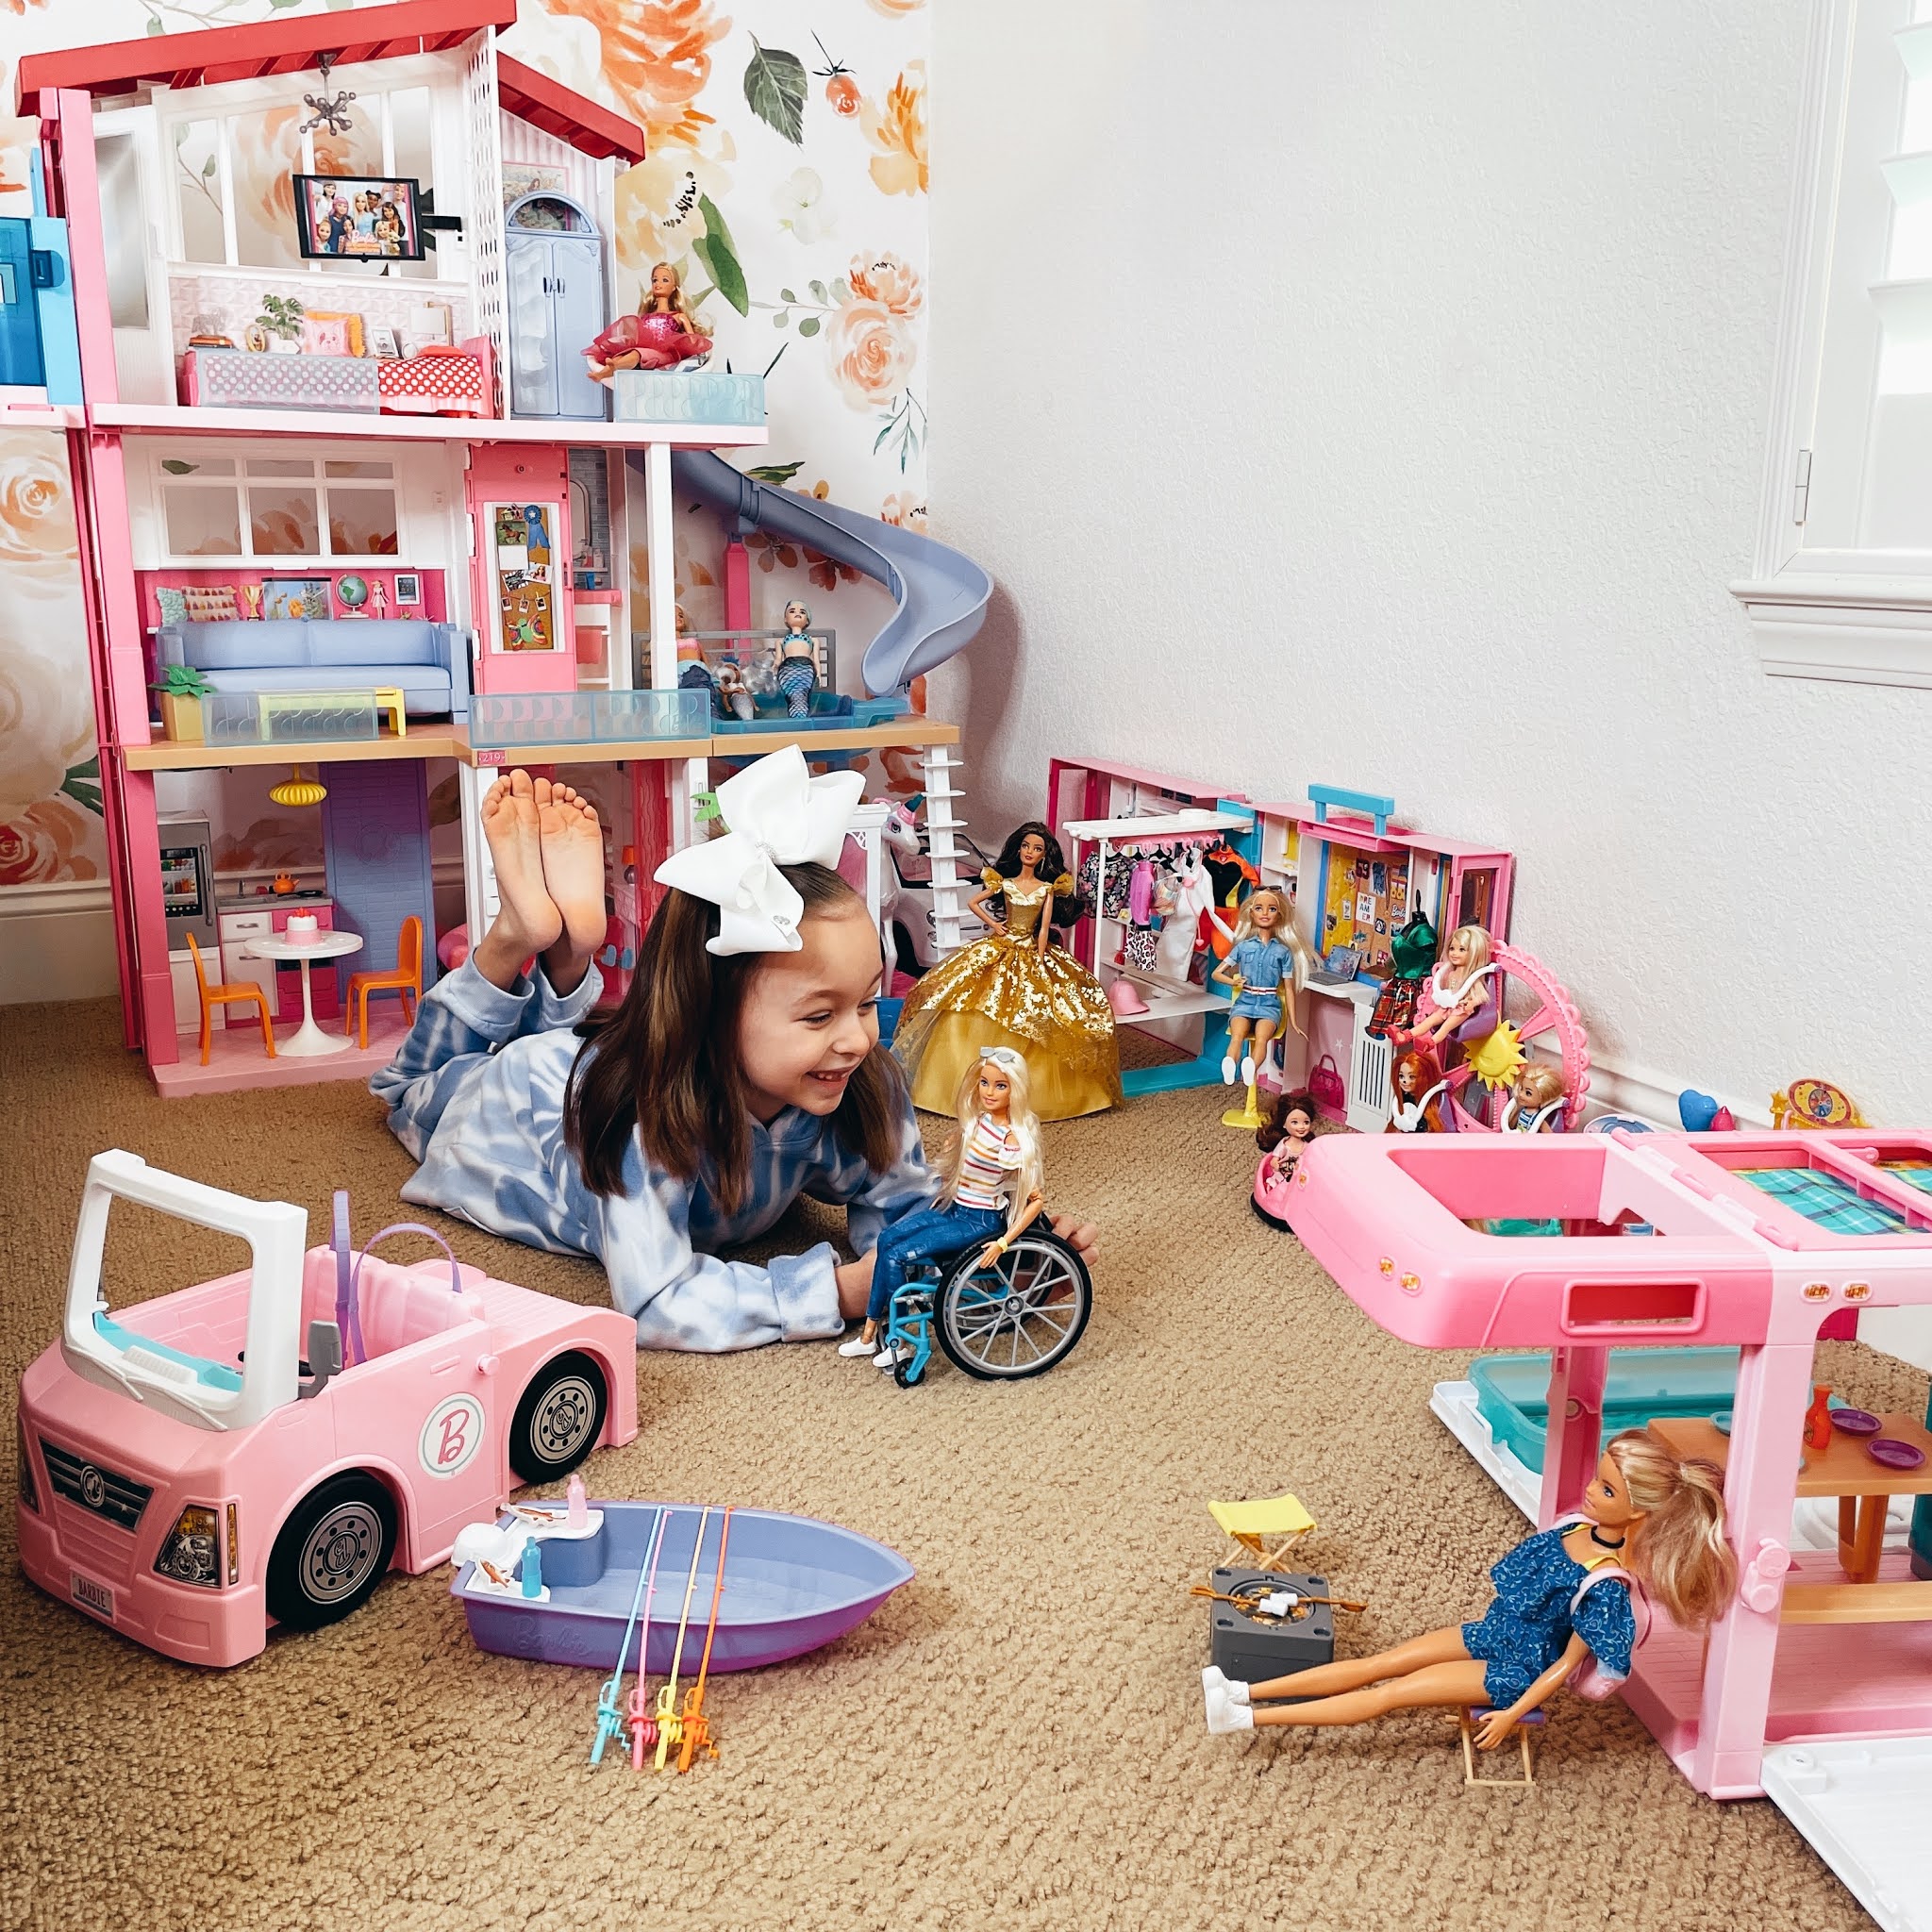 Barbie Camper, Doll Playset with 50 Accessories, Transforms into Truck,  Boat & House, Includes Pool, 3-in-1 Dream Camper ( Exclusive)